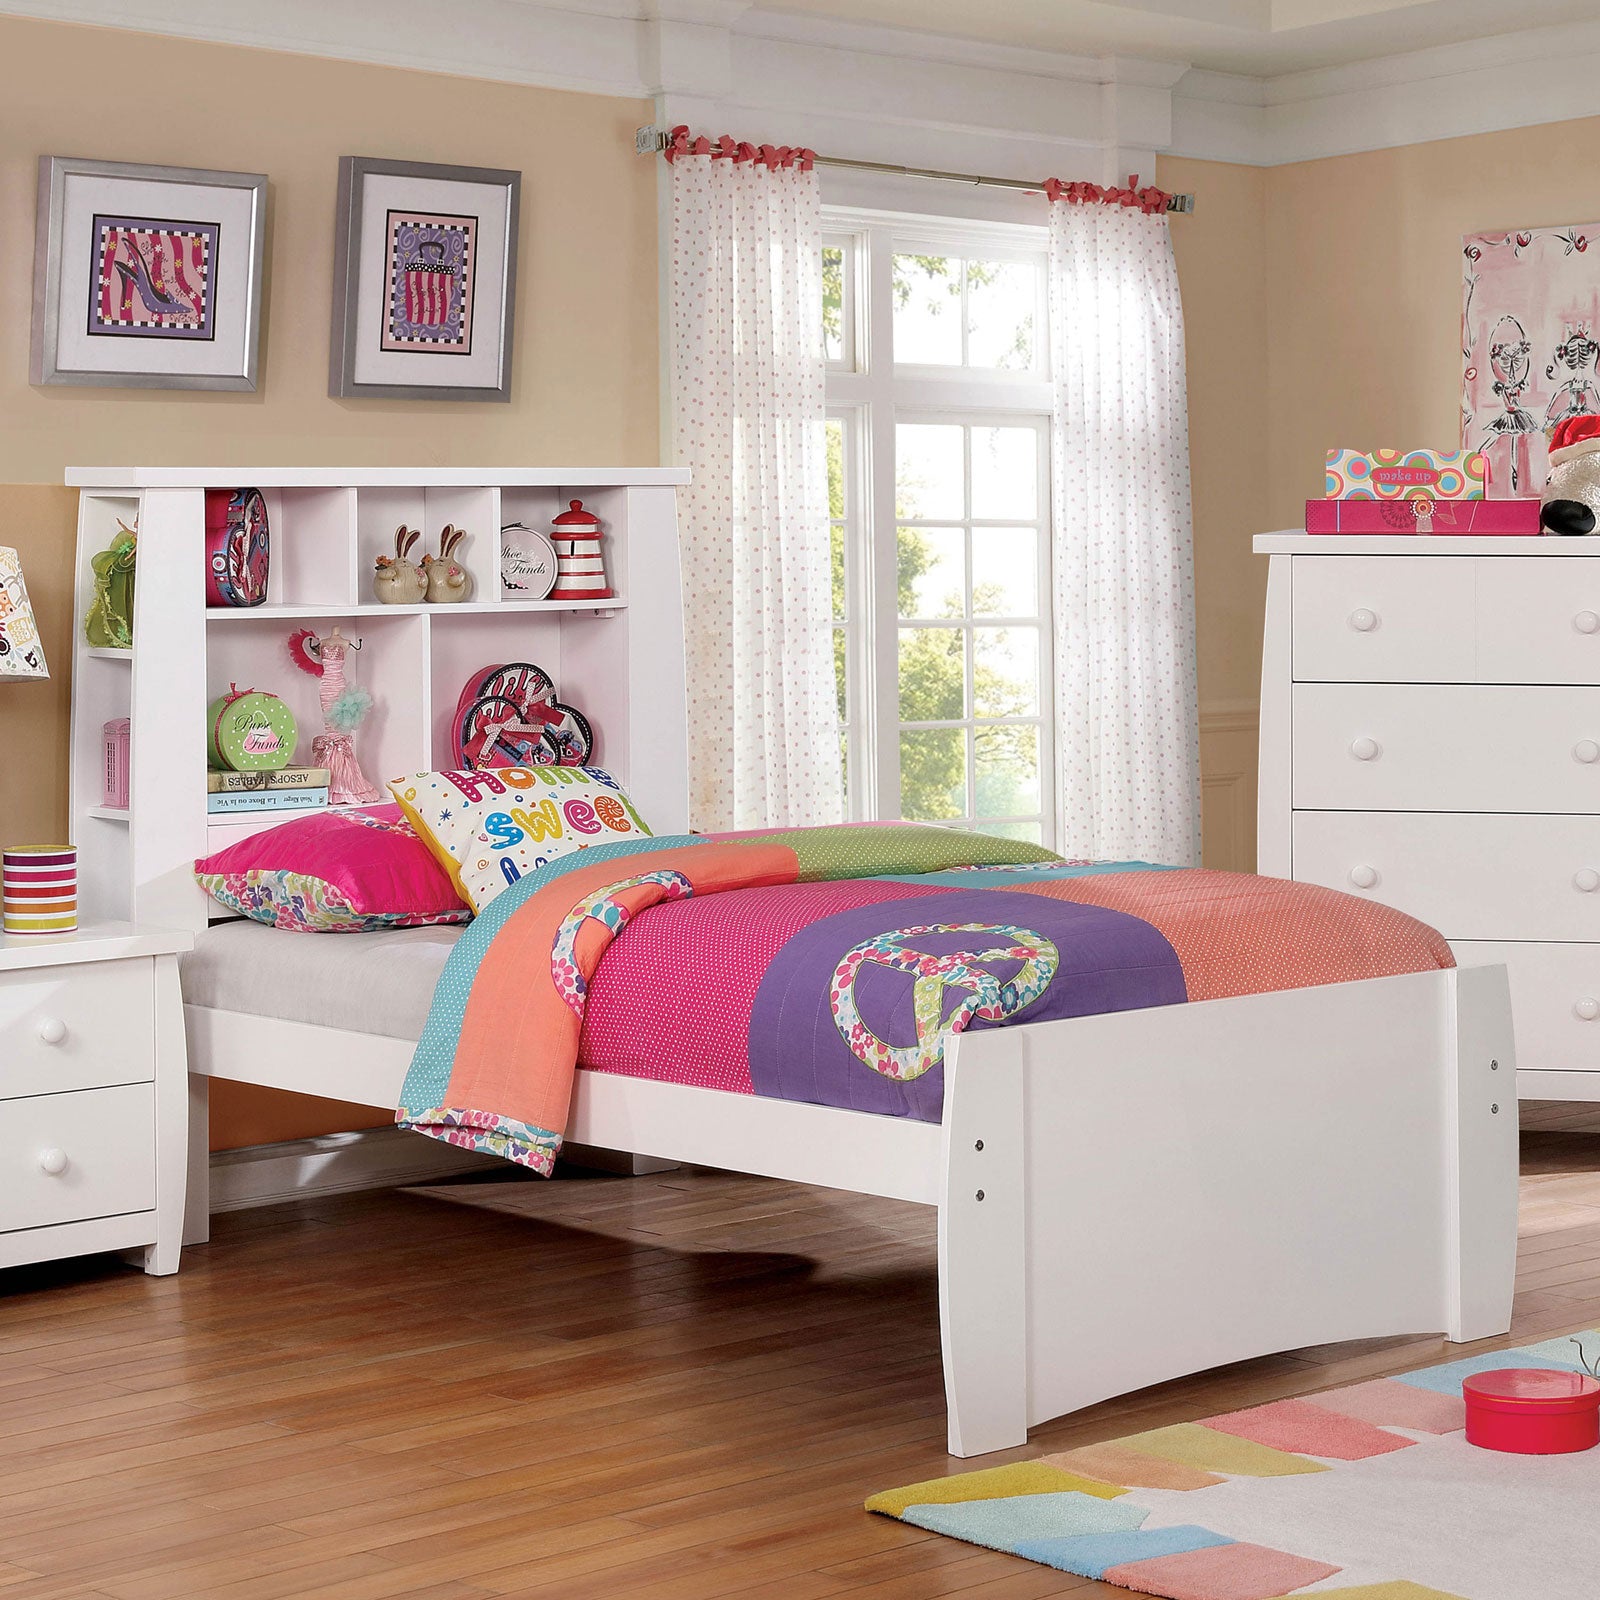 Marlee White Twin Bed image